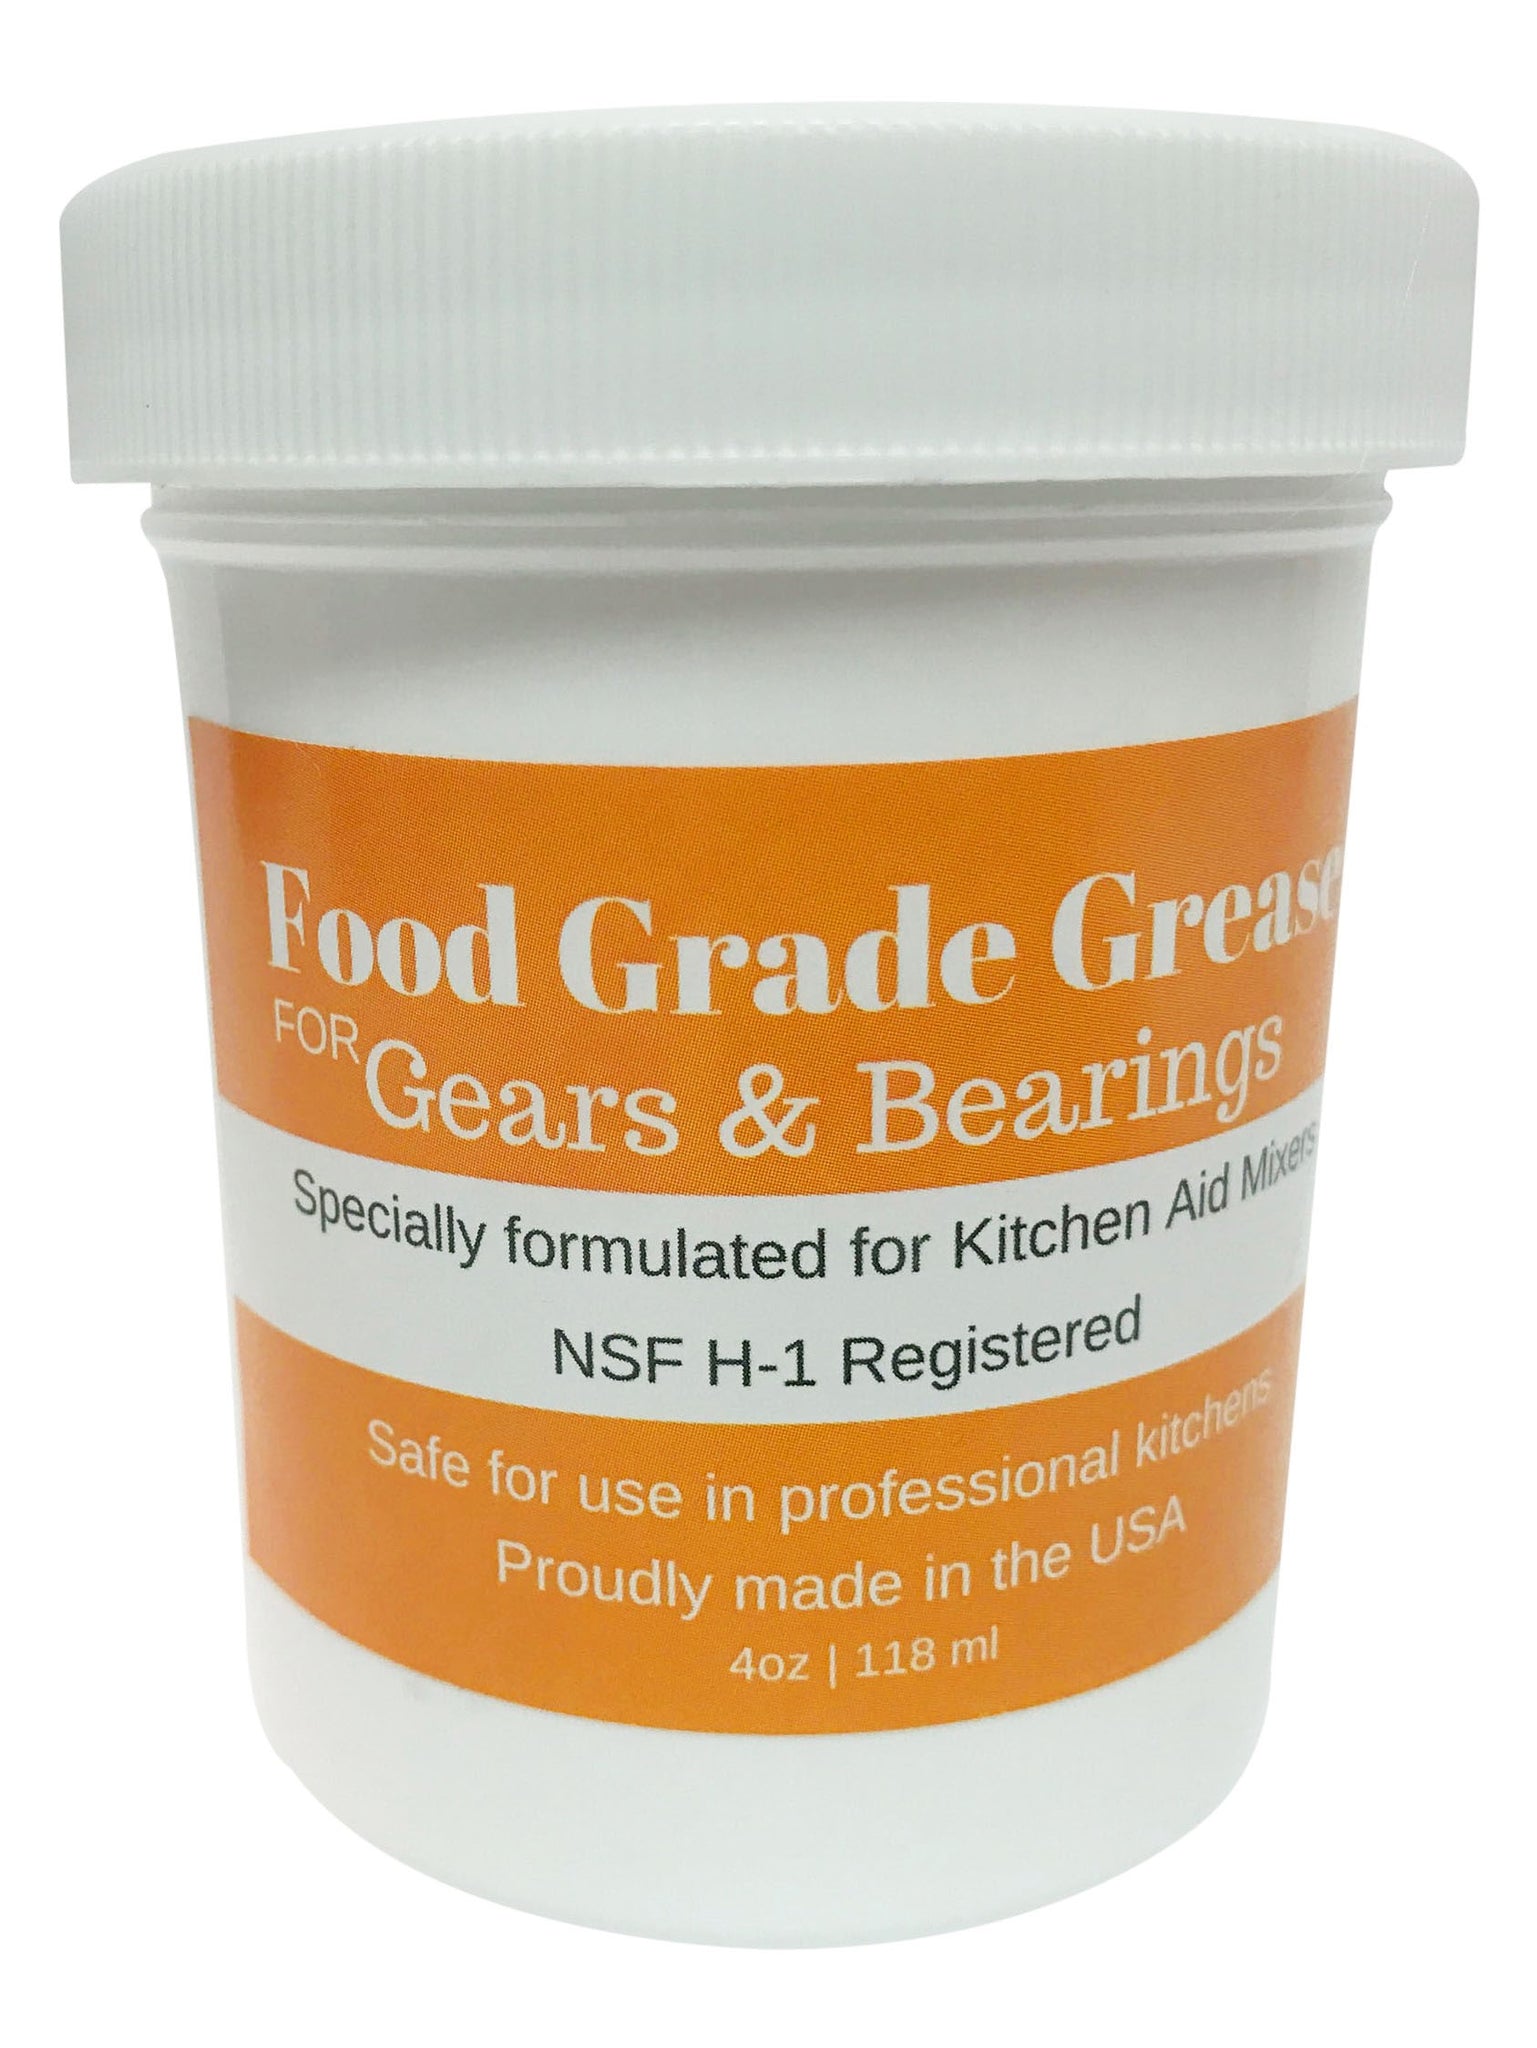 UniKitchen 4oz Food Grade Grease for Kitchen Stand Mixers Made in